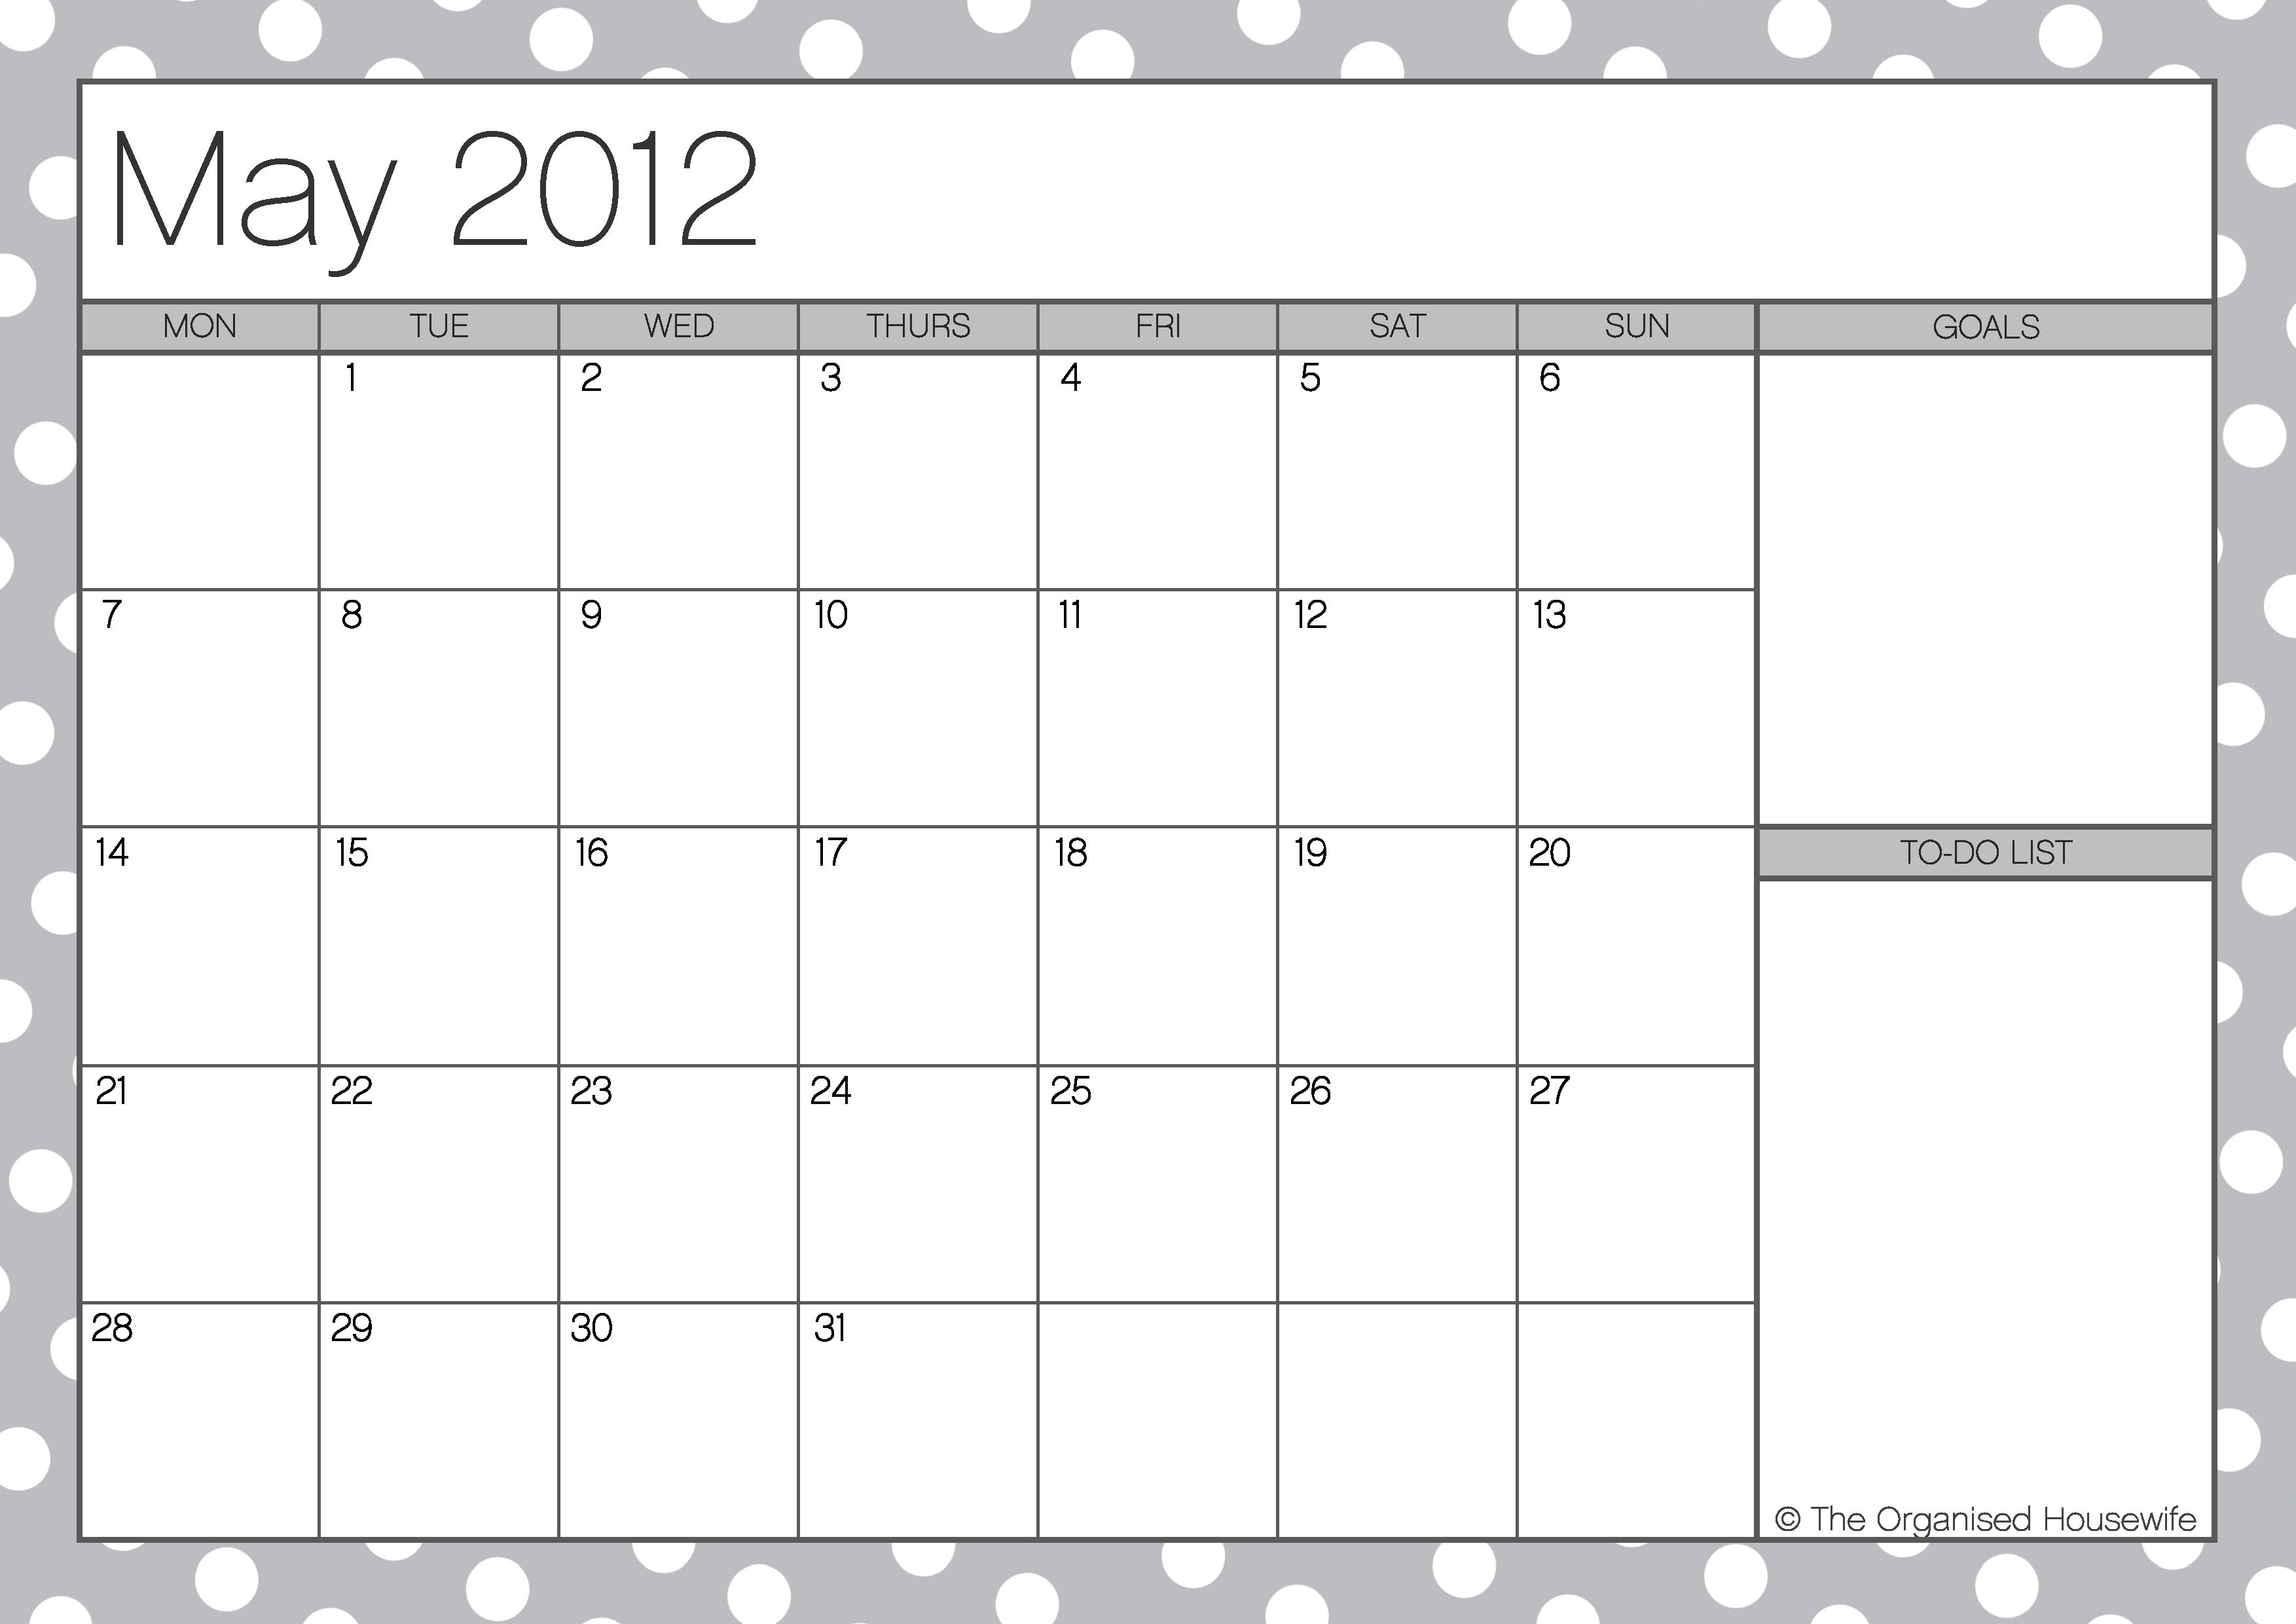 {FREE PRINTABLE} May 2012 Calendar with todo list The Organised